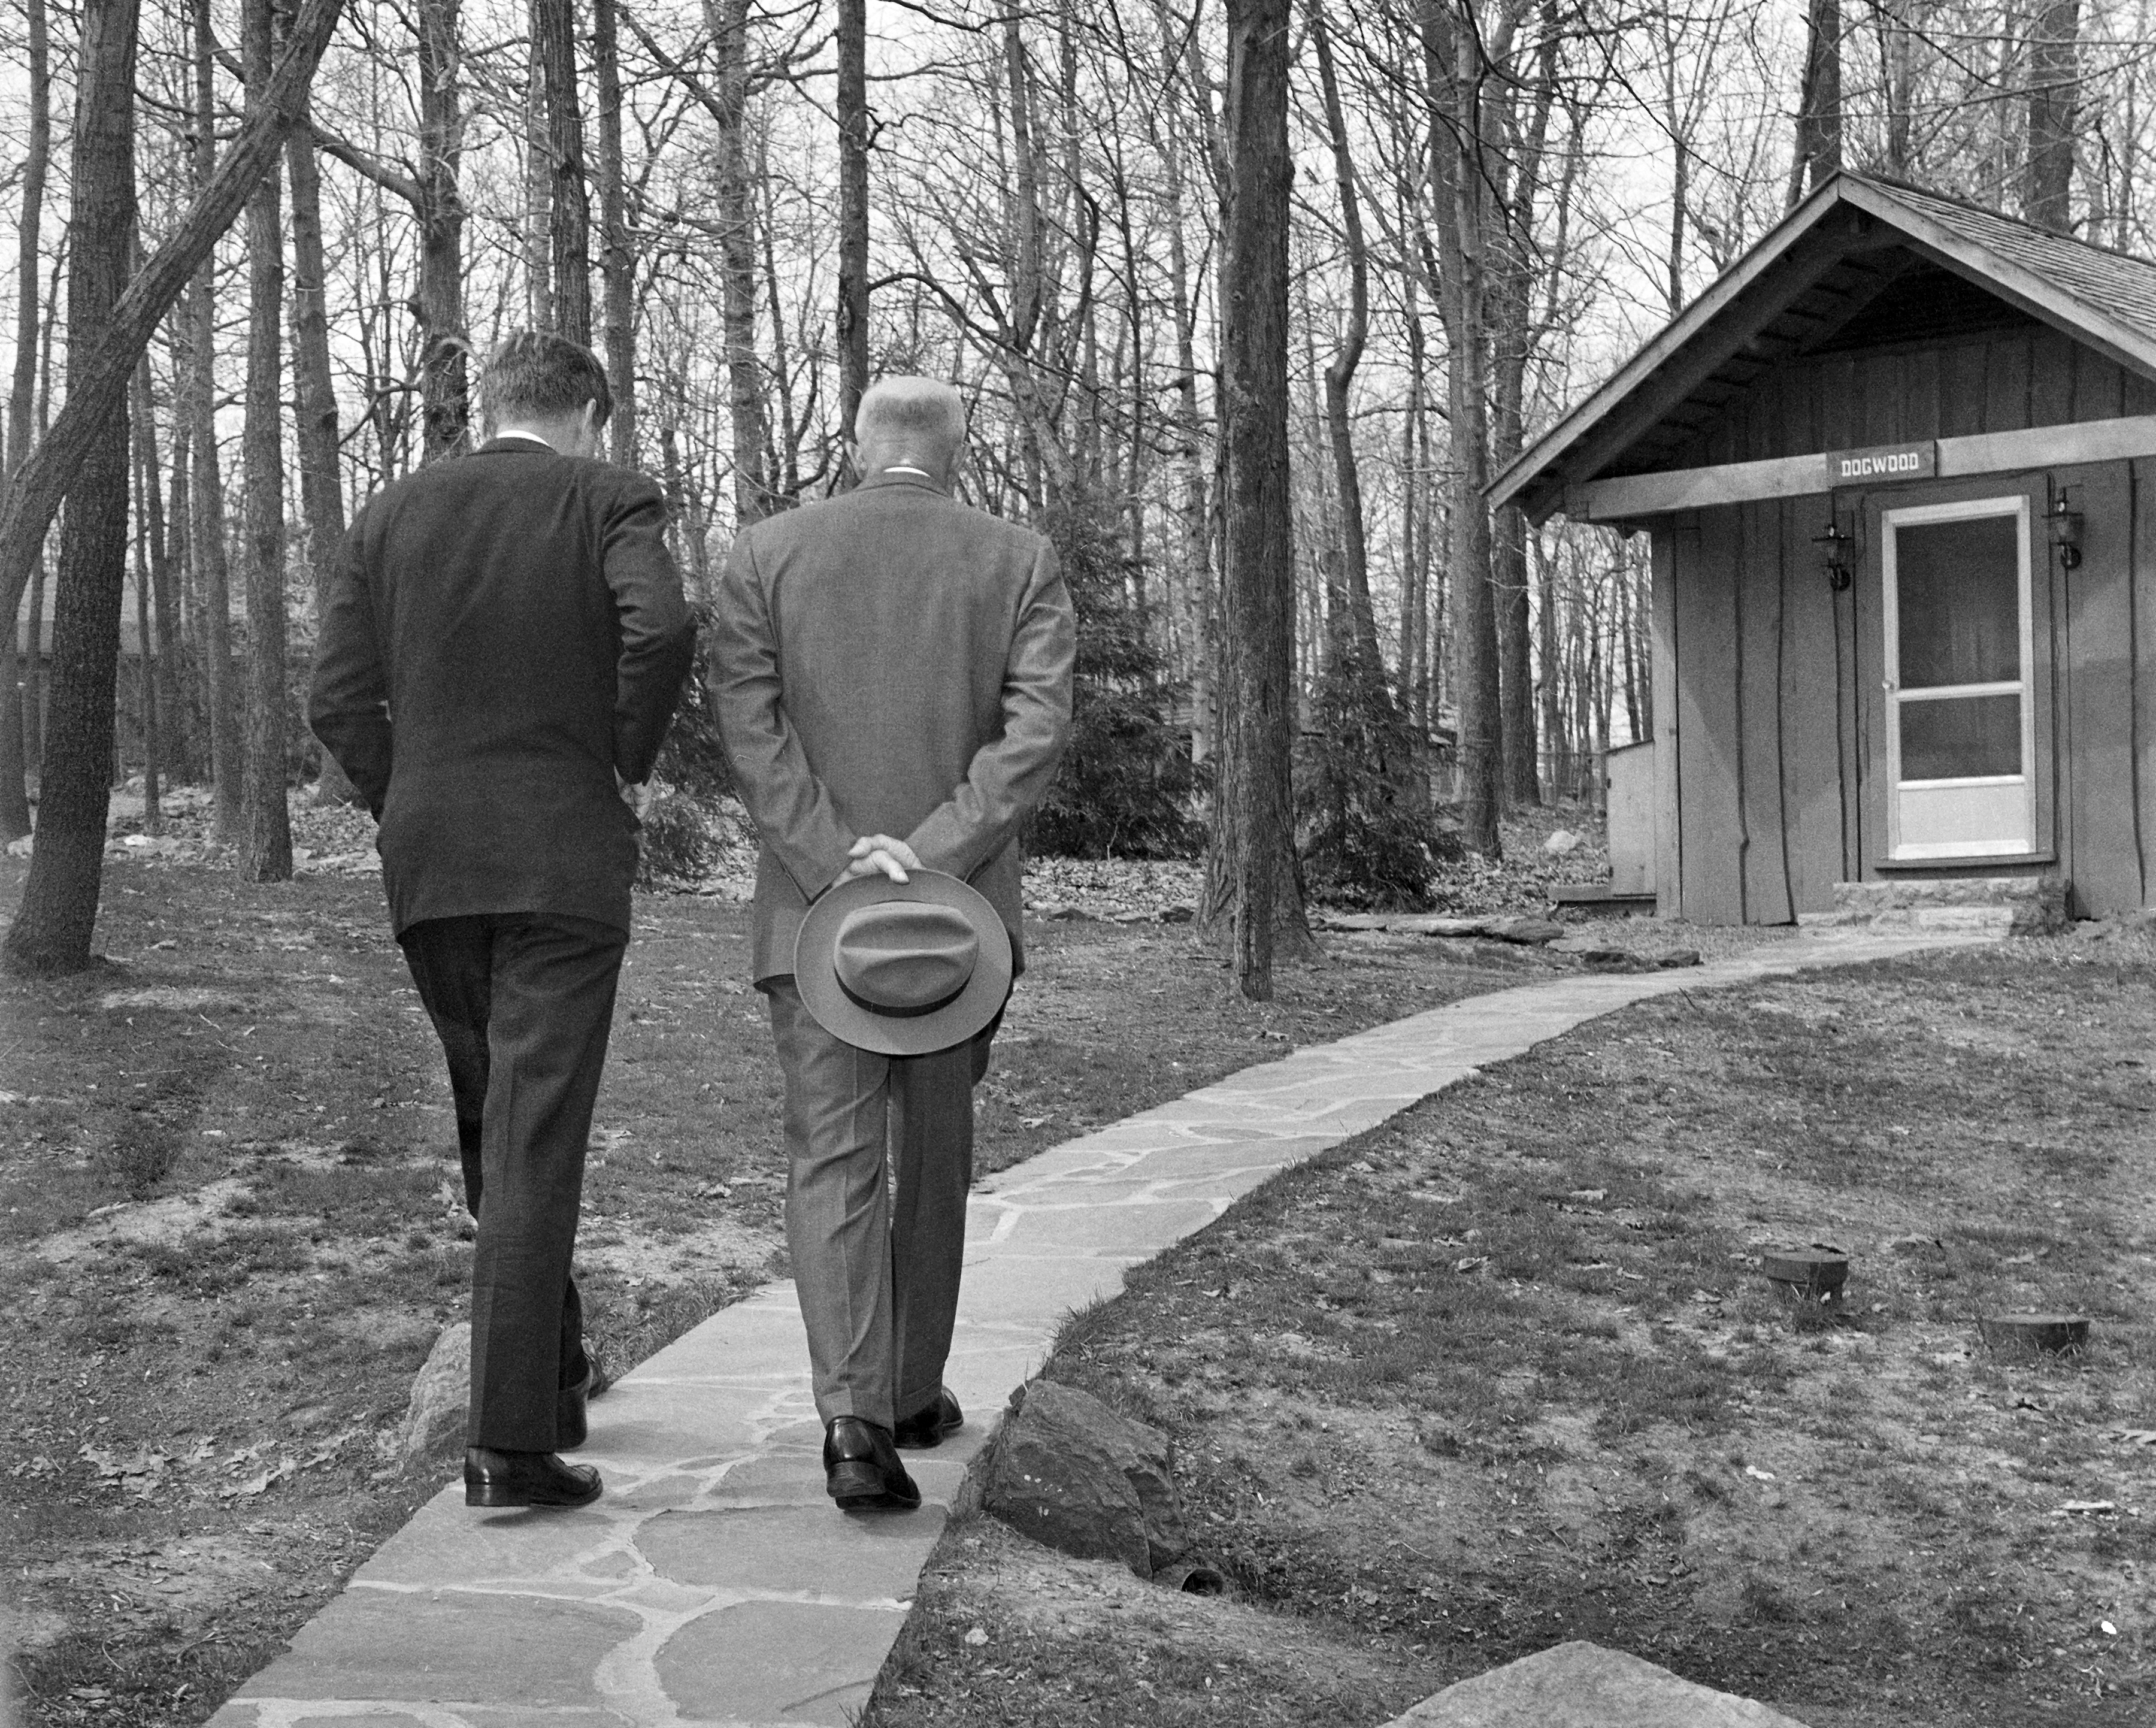 With their heads bowed, President John F. Kennedy, left, walks along a path at Camp David near Thurmont, Md., with former President Dwight D. Eisenhower, April 22, 1961, as the two met to discuss the Bay of Pigs invasion. The photo was shot between the legs of a Secret Service agent. (AP Photo/Paul Vathis)